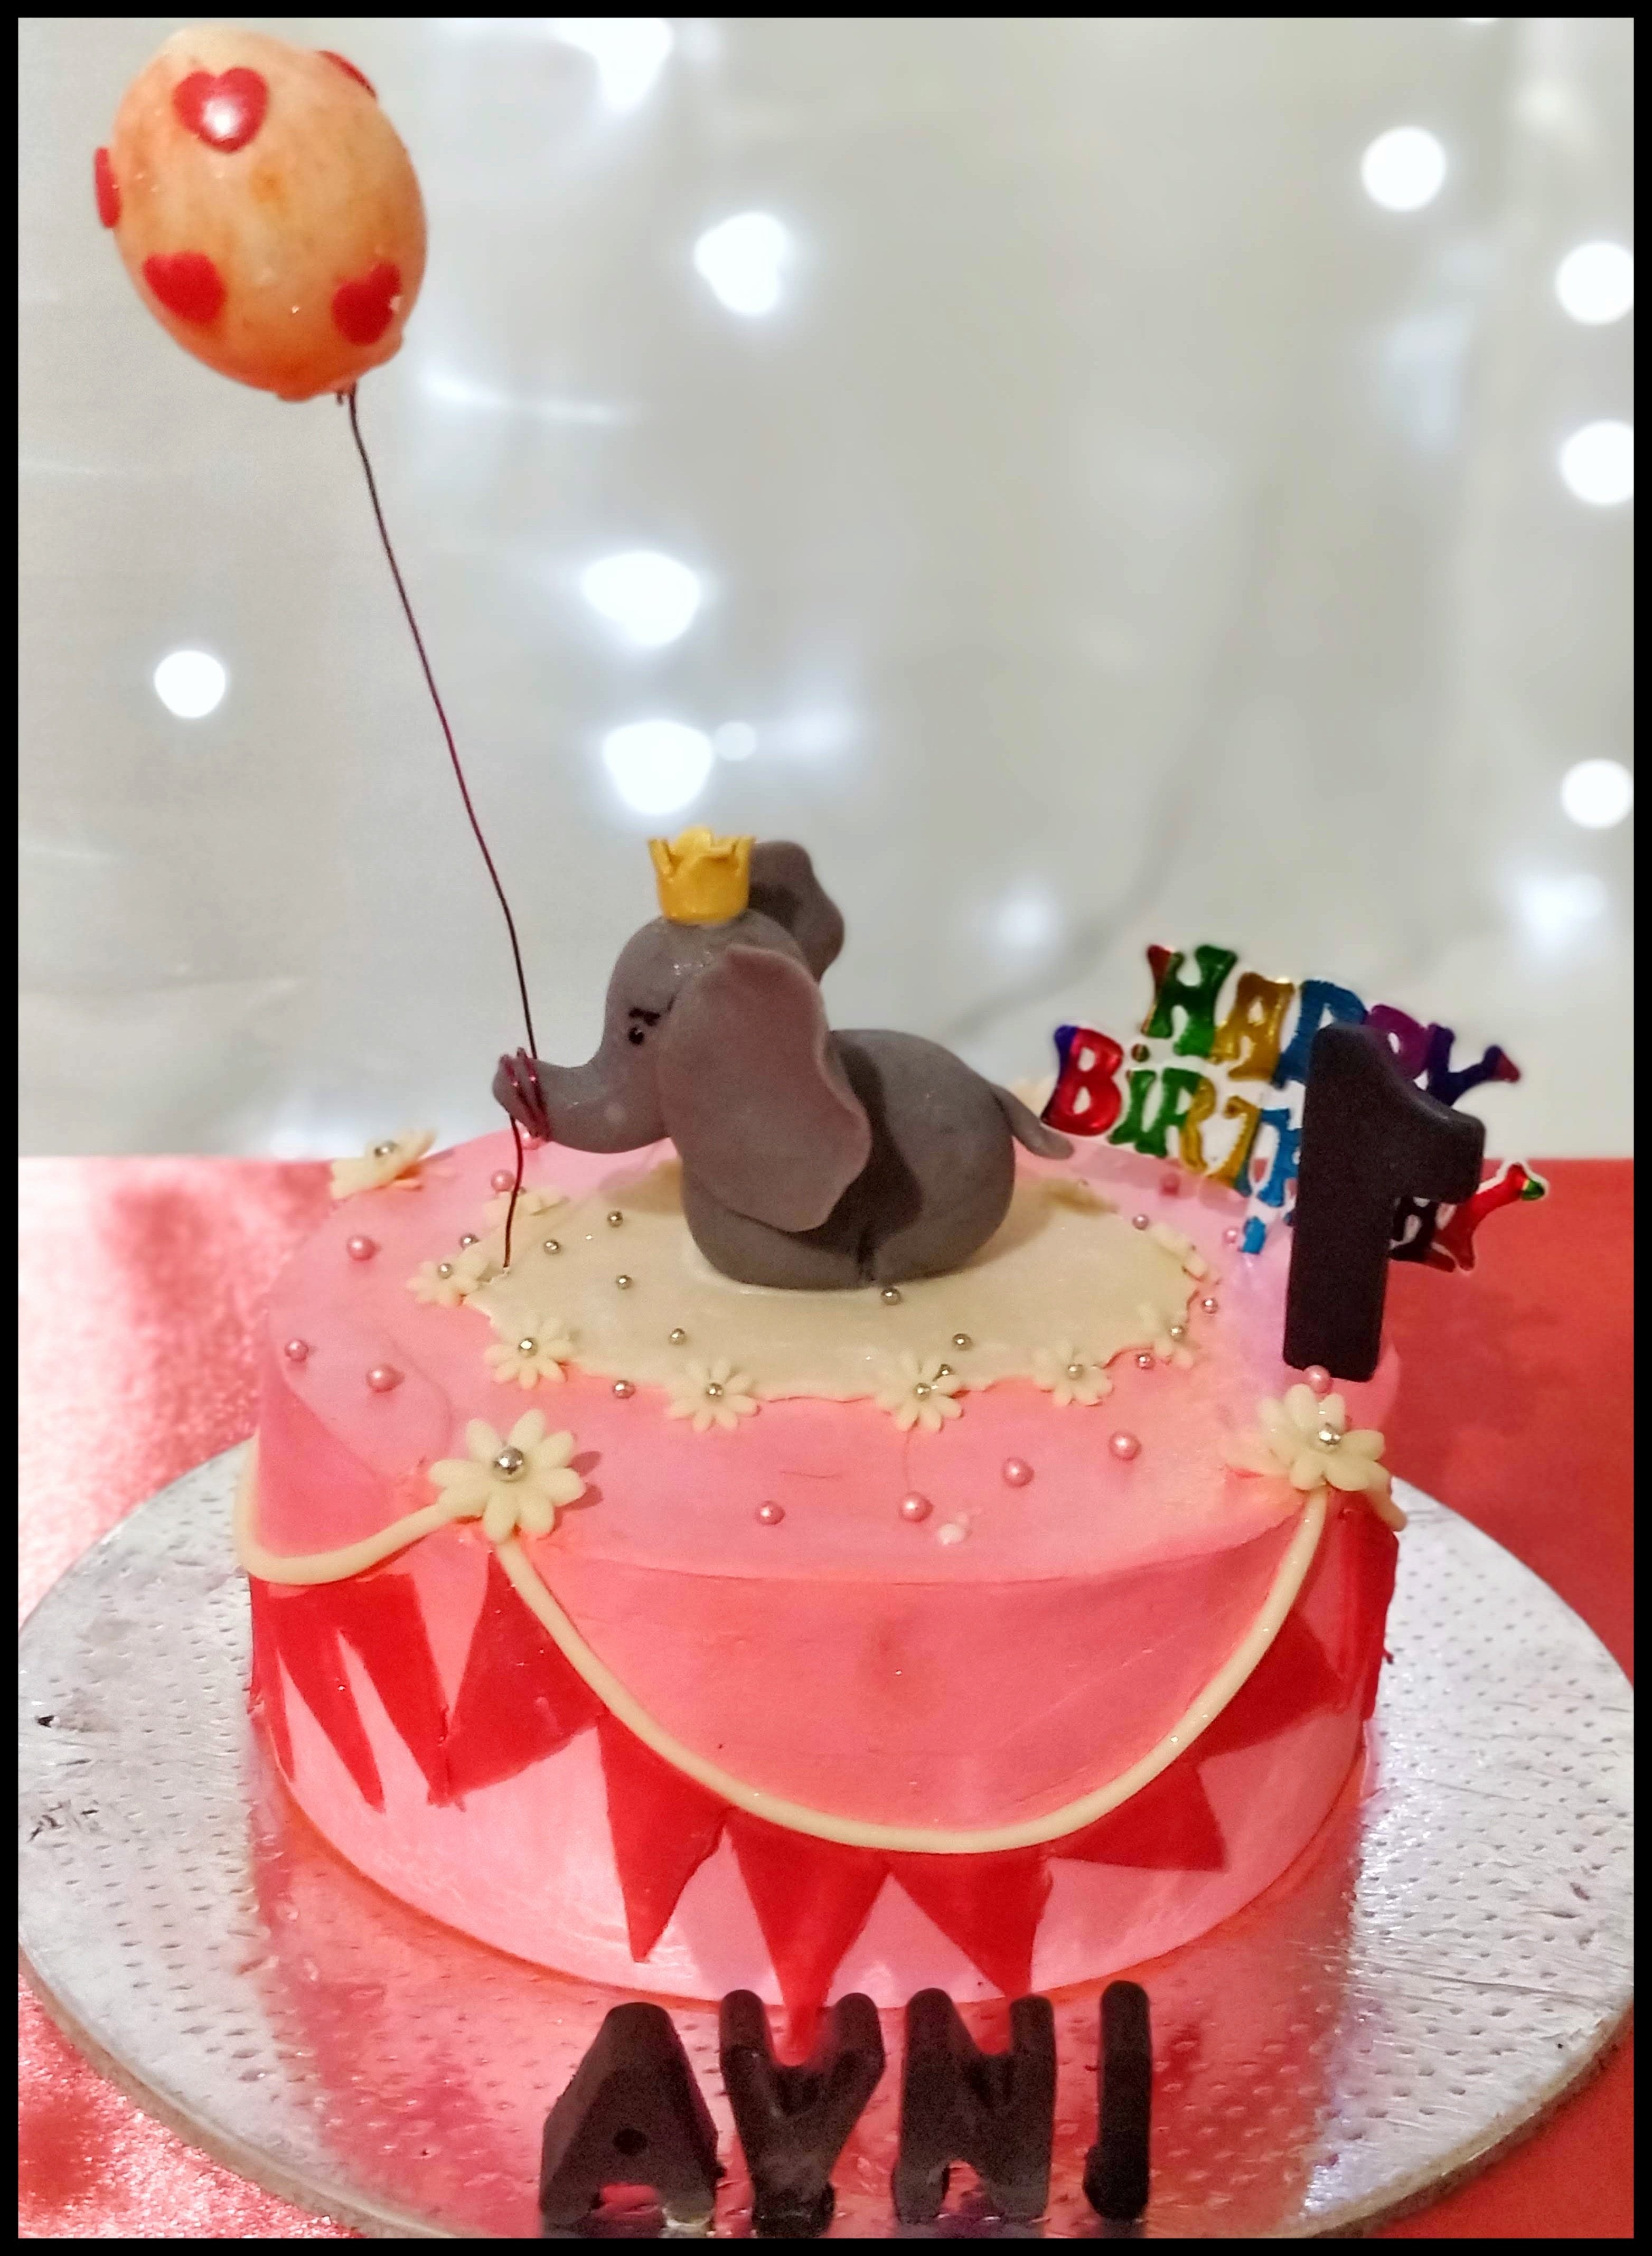 Elephant edible cake topper image muffin party decoration birthday new gift  | eBay